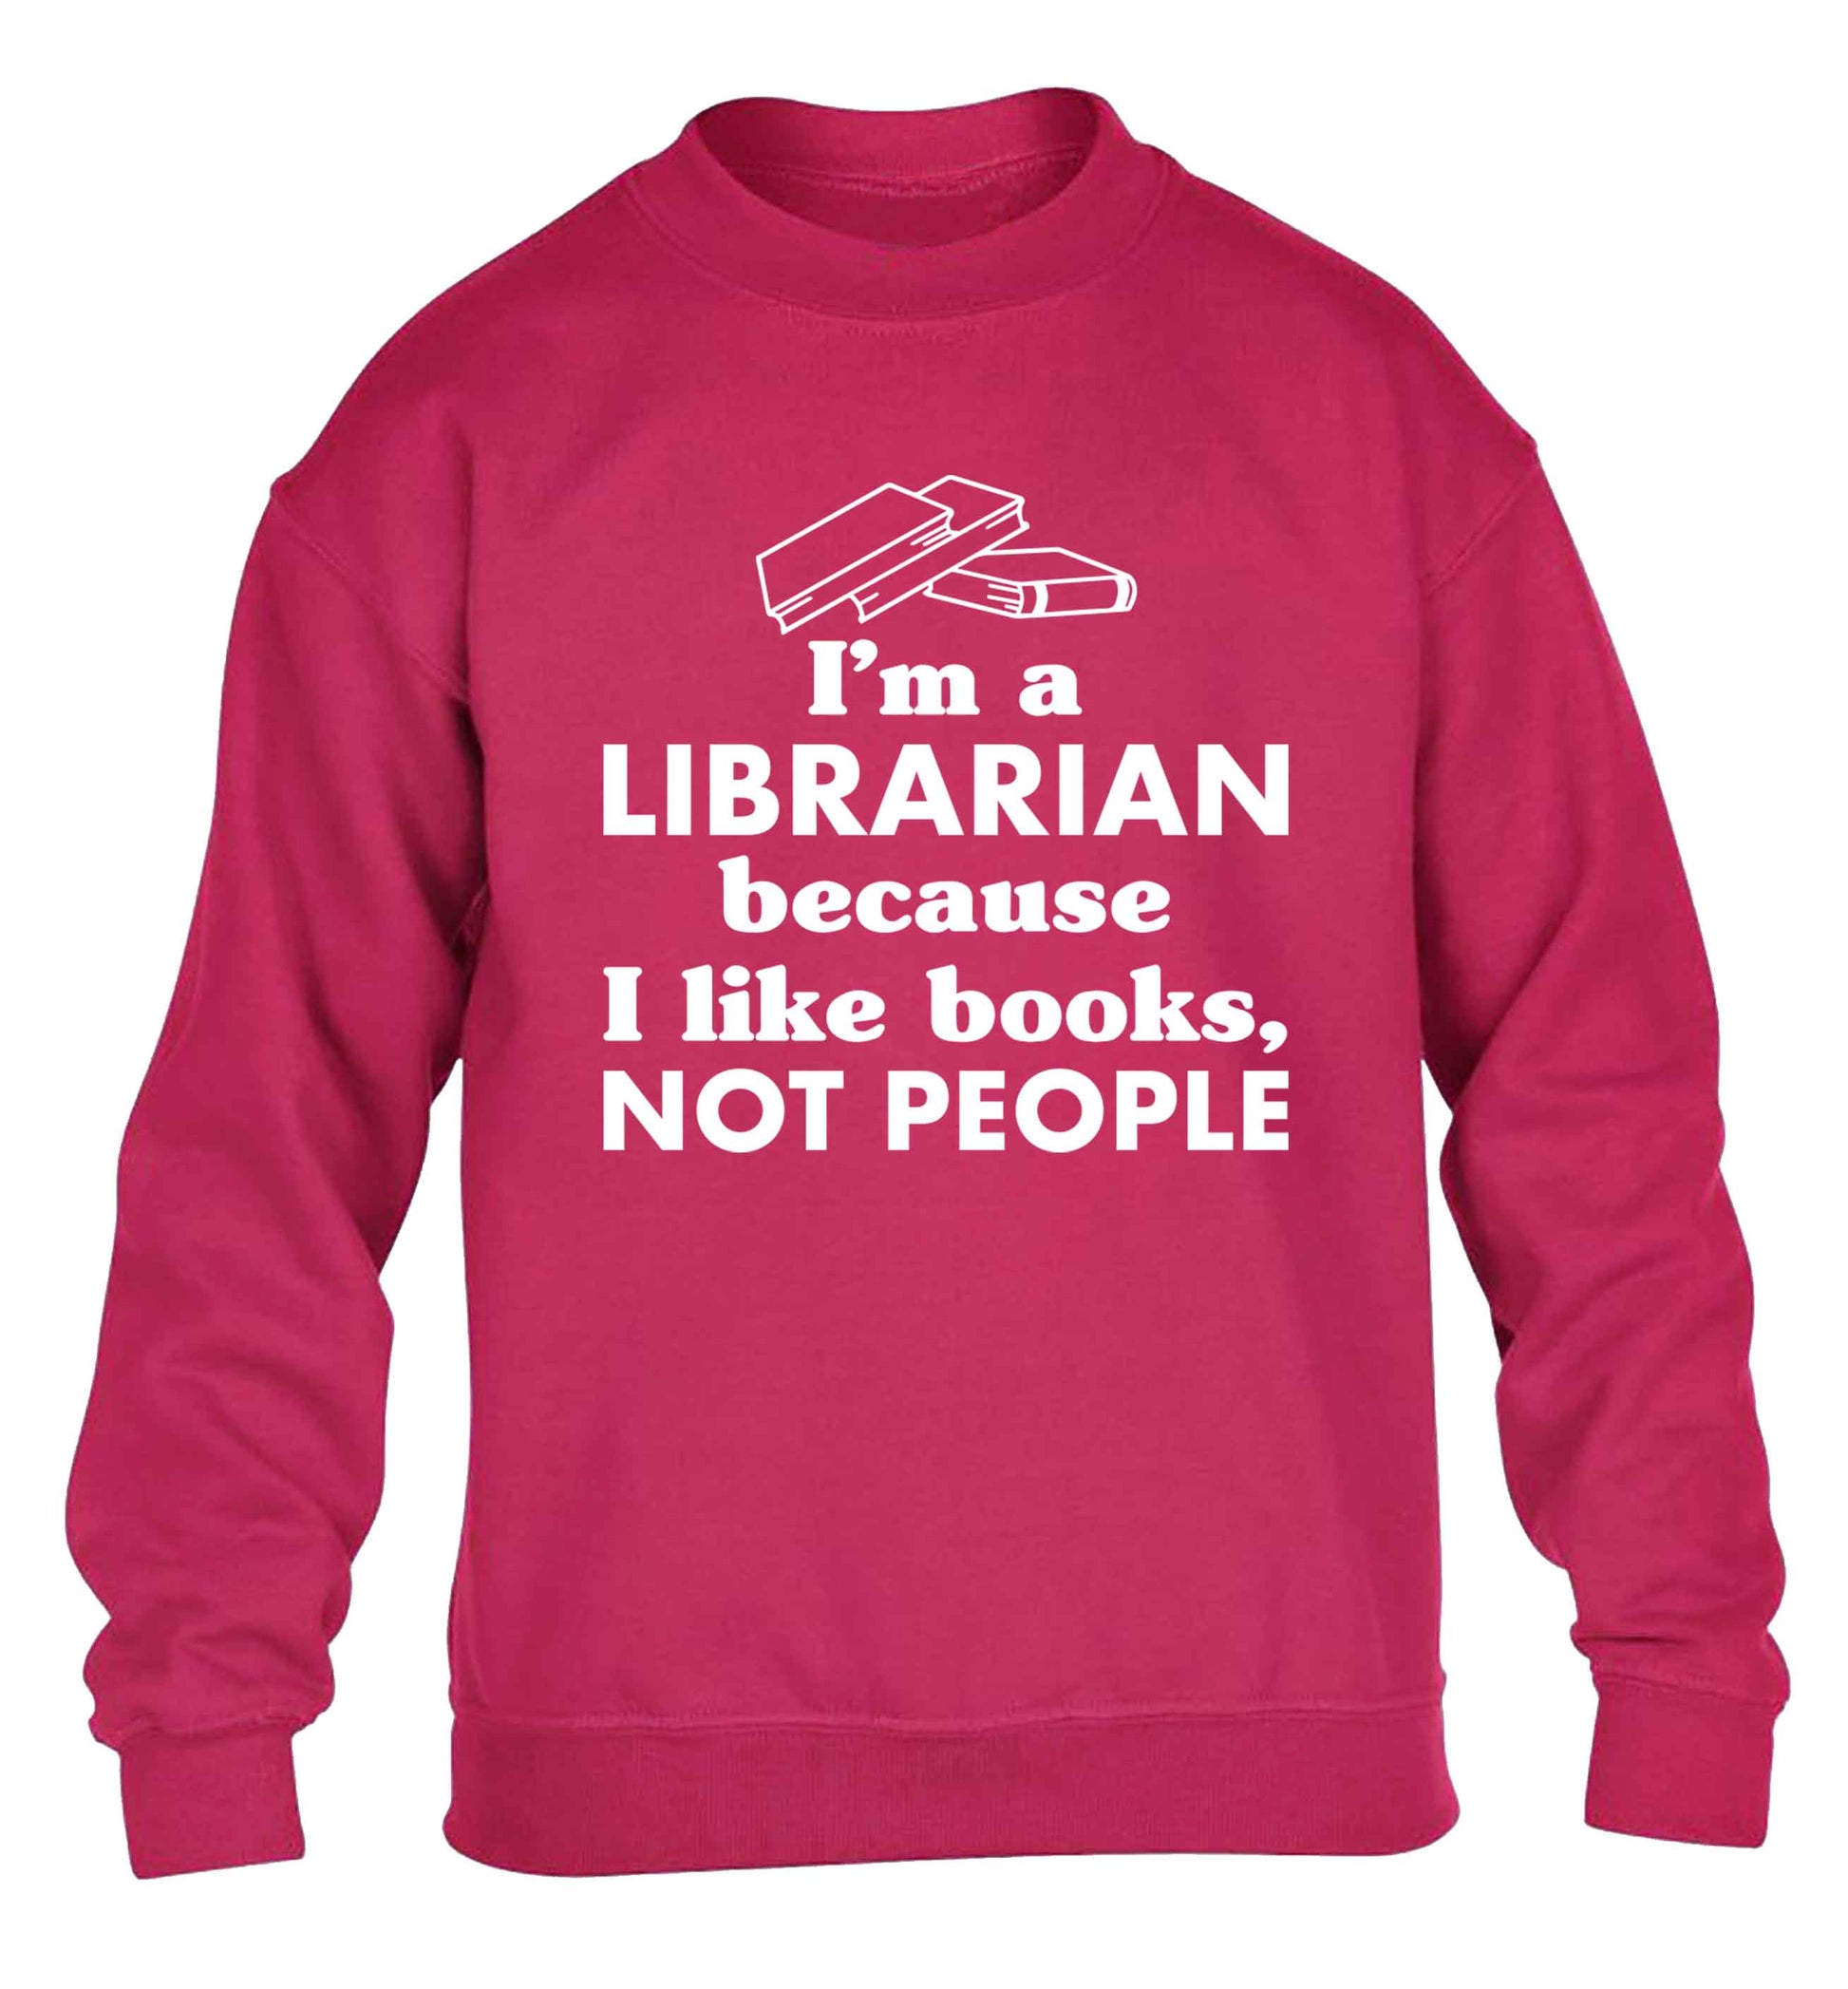 I'm a librarian because I like books not people children's pink sweater 12-13 Years